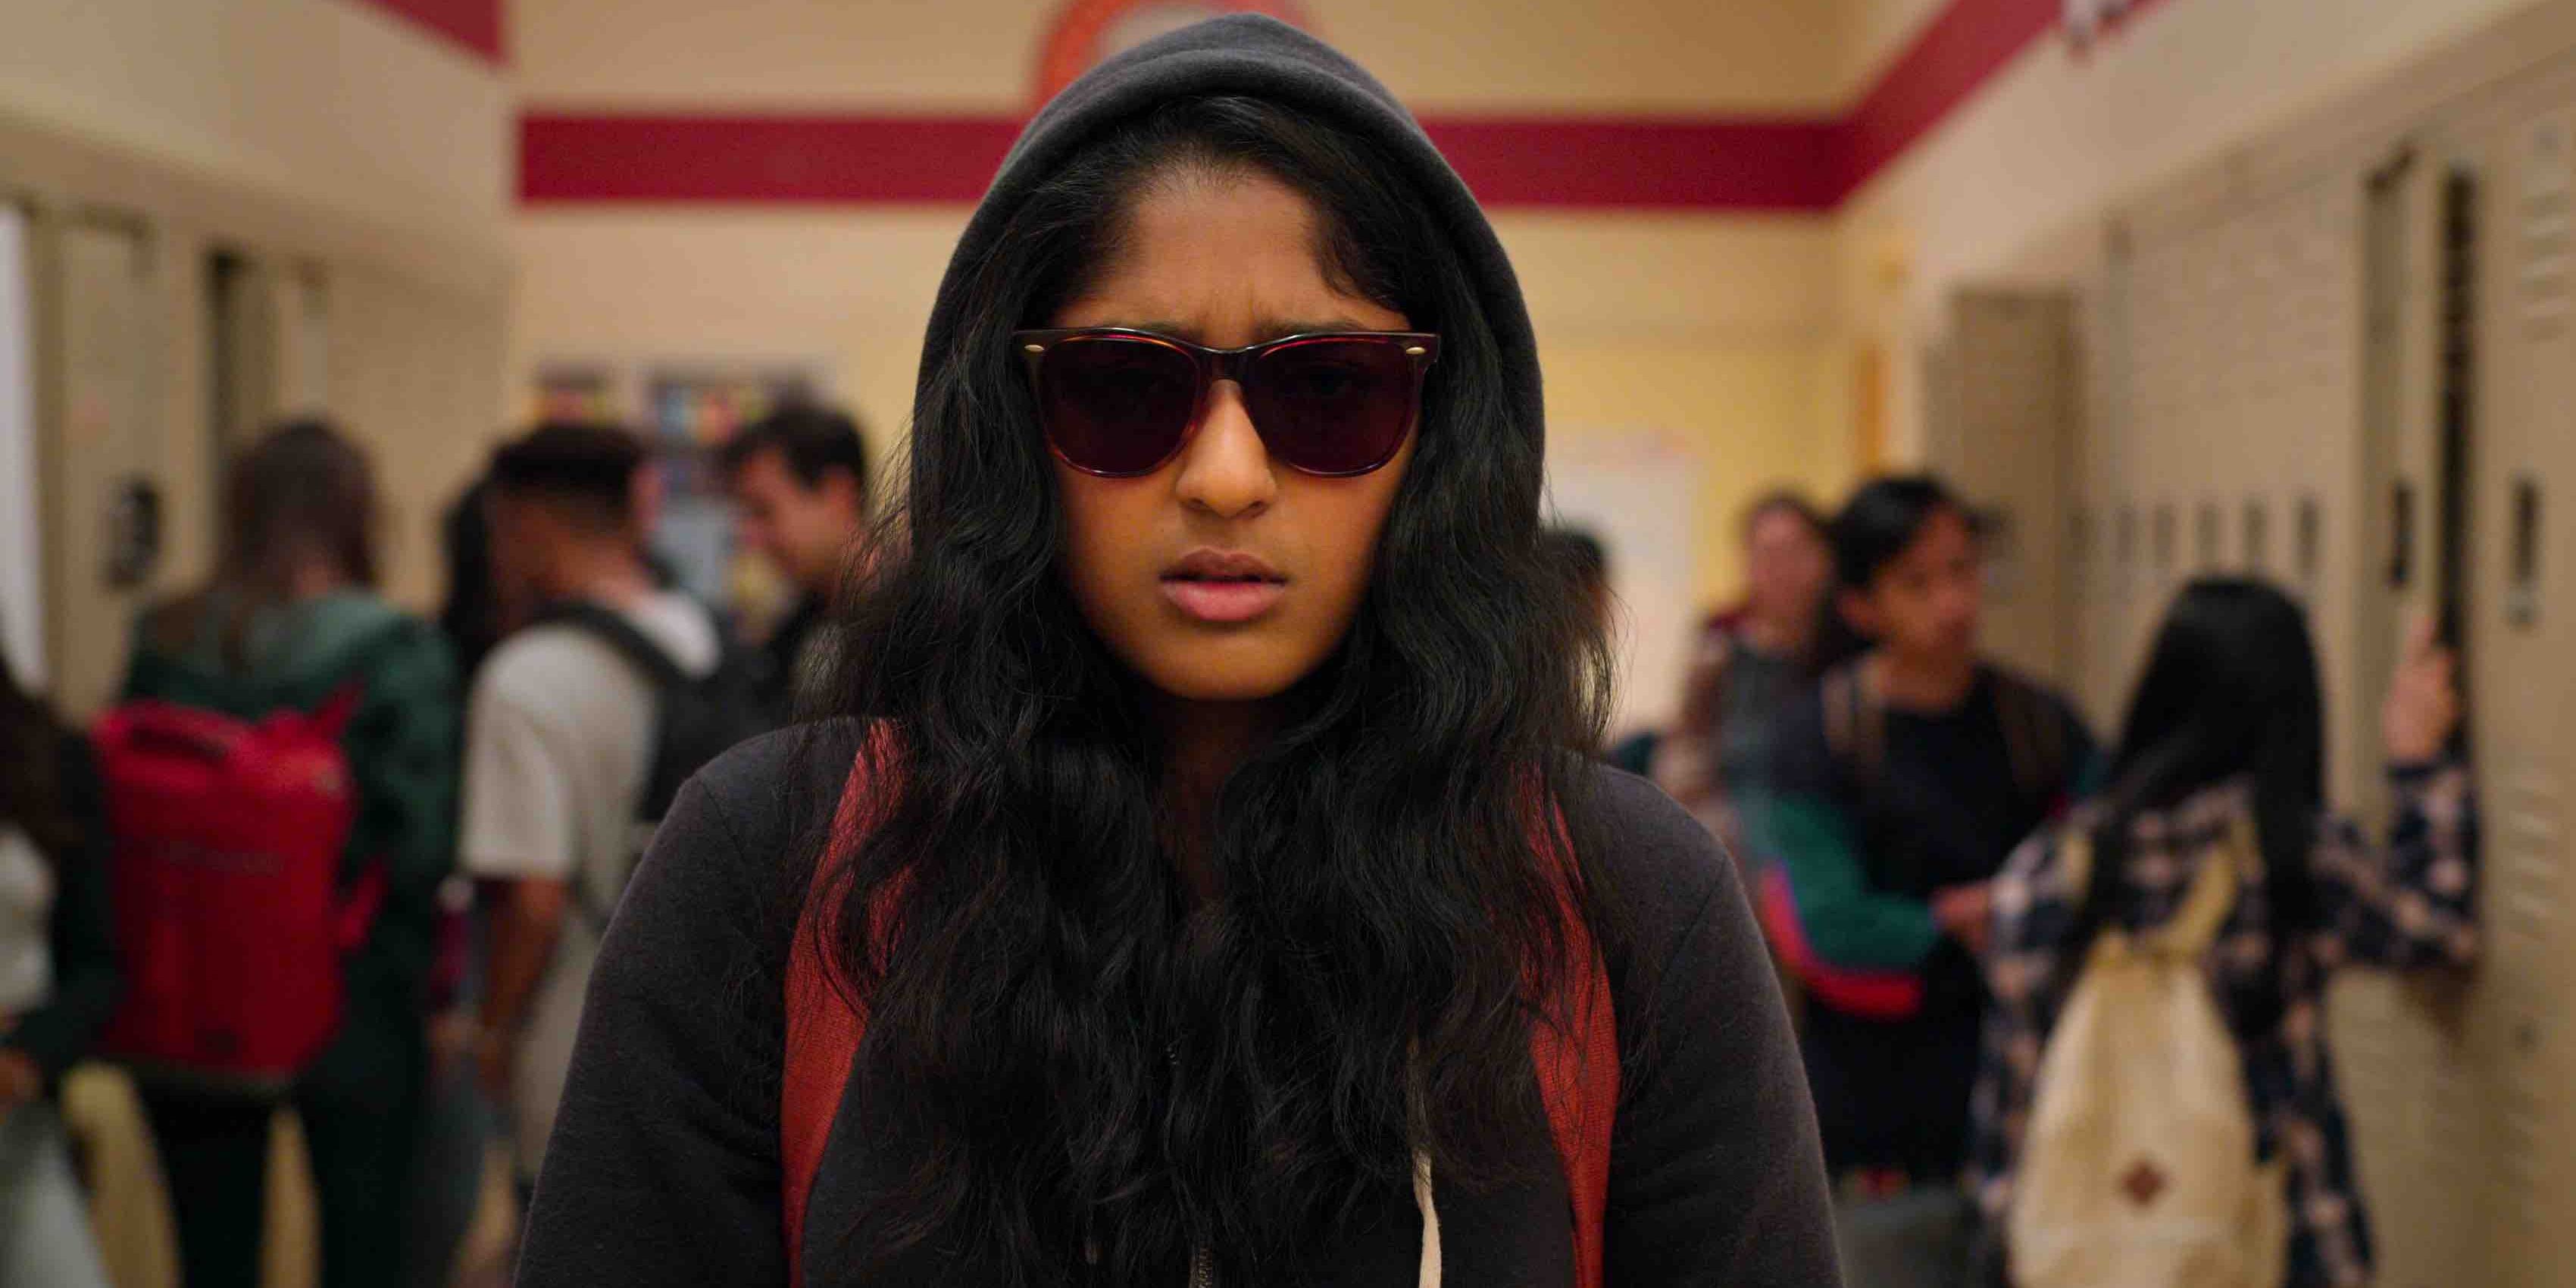 Devi wearing a hood and sunglasses in Never Have I Ever